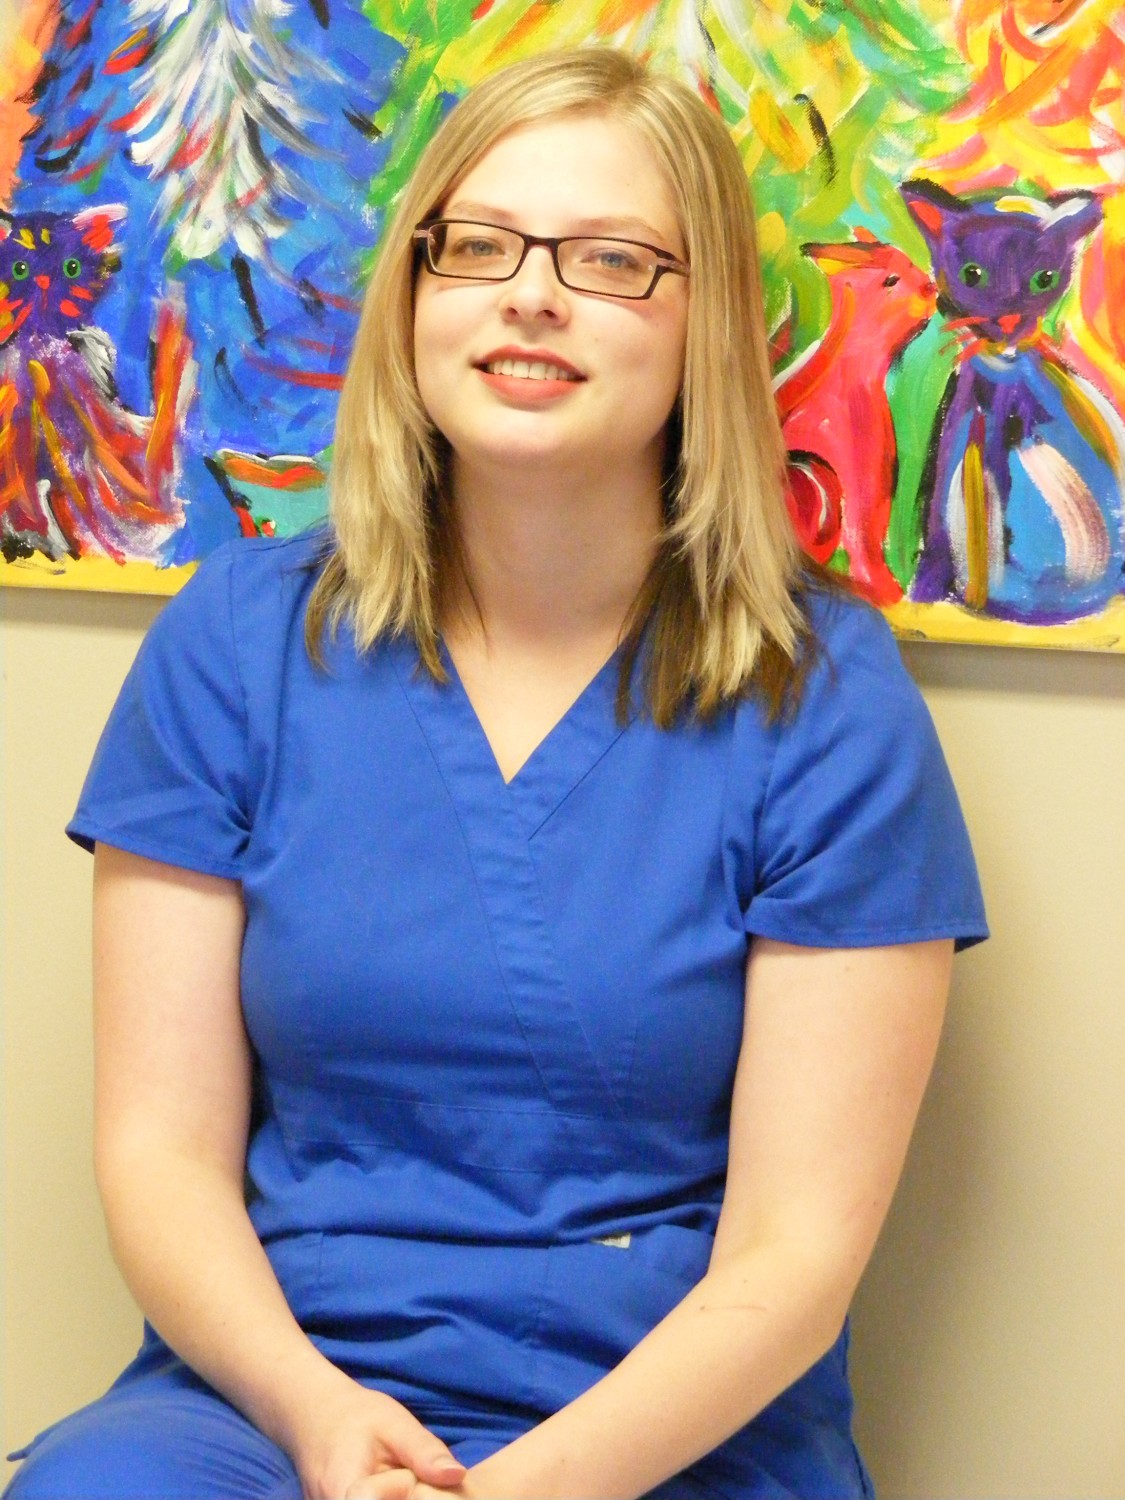 Clyde Park Veterinary Clinic - Wyoming, MI - Donna Wilhoite, Veterinary Assistant